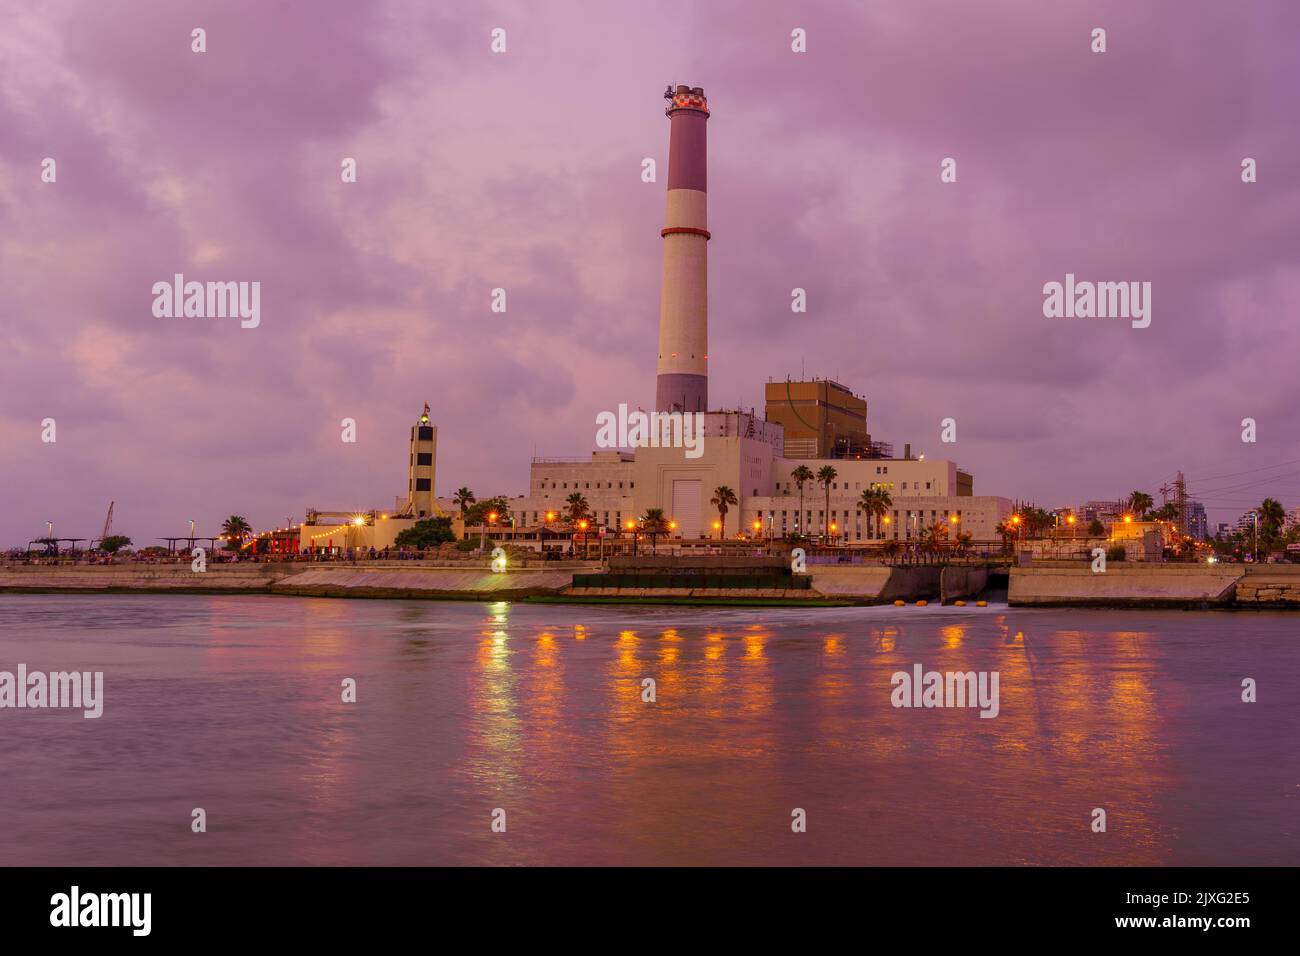 Sunset view of the Reading power station and lighthouse, in Tel-Aviv, Israel Stock Photo